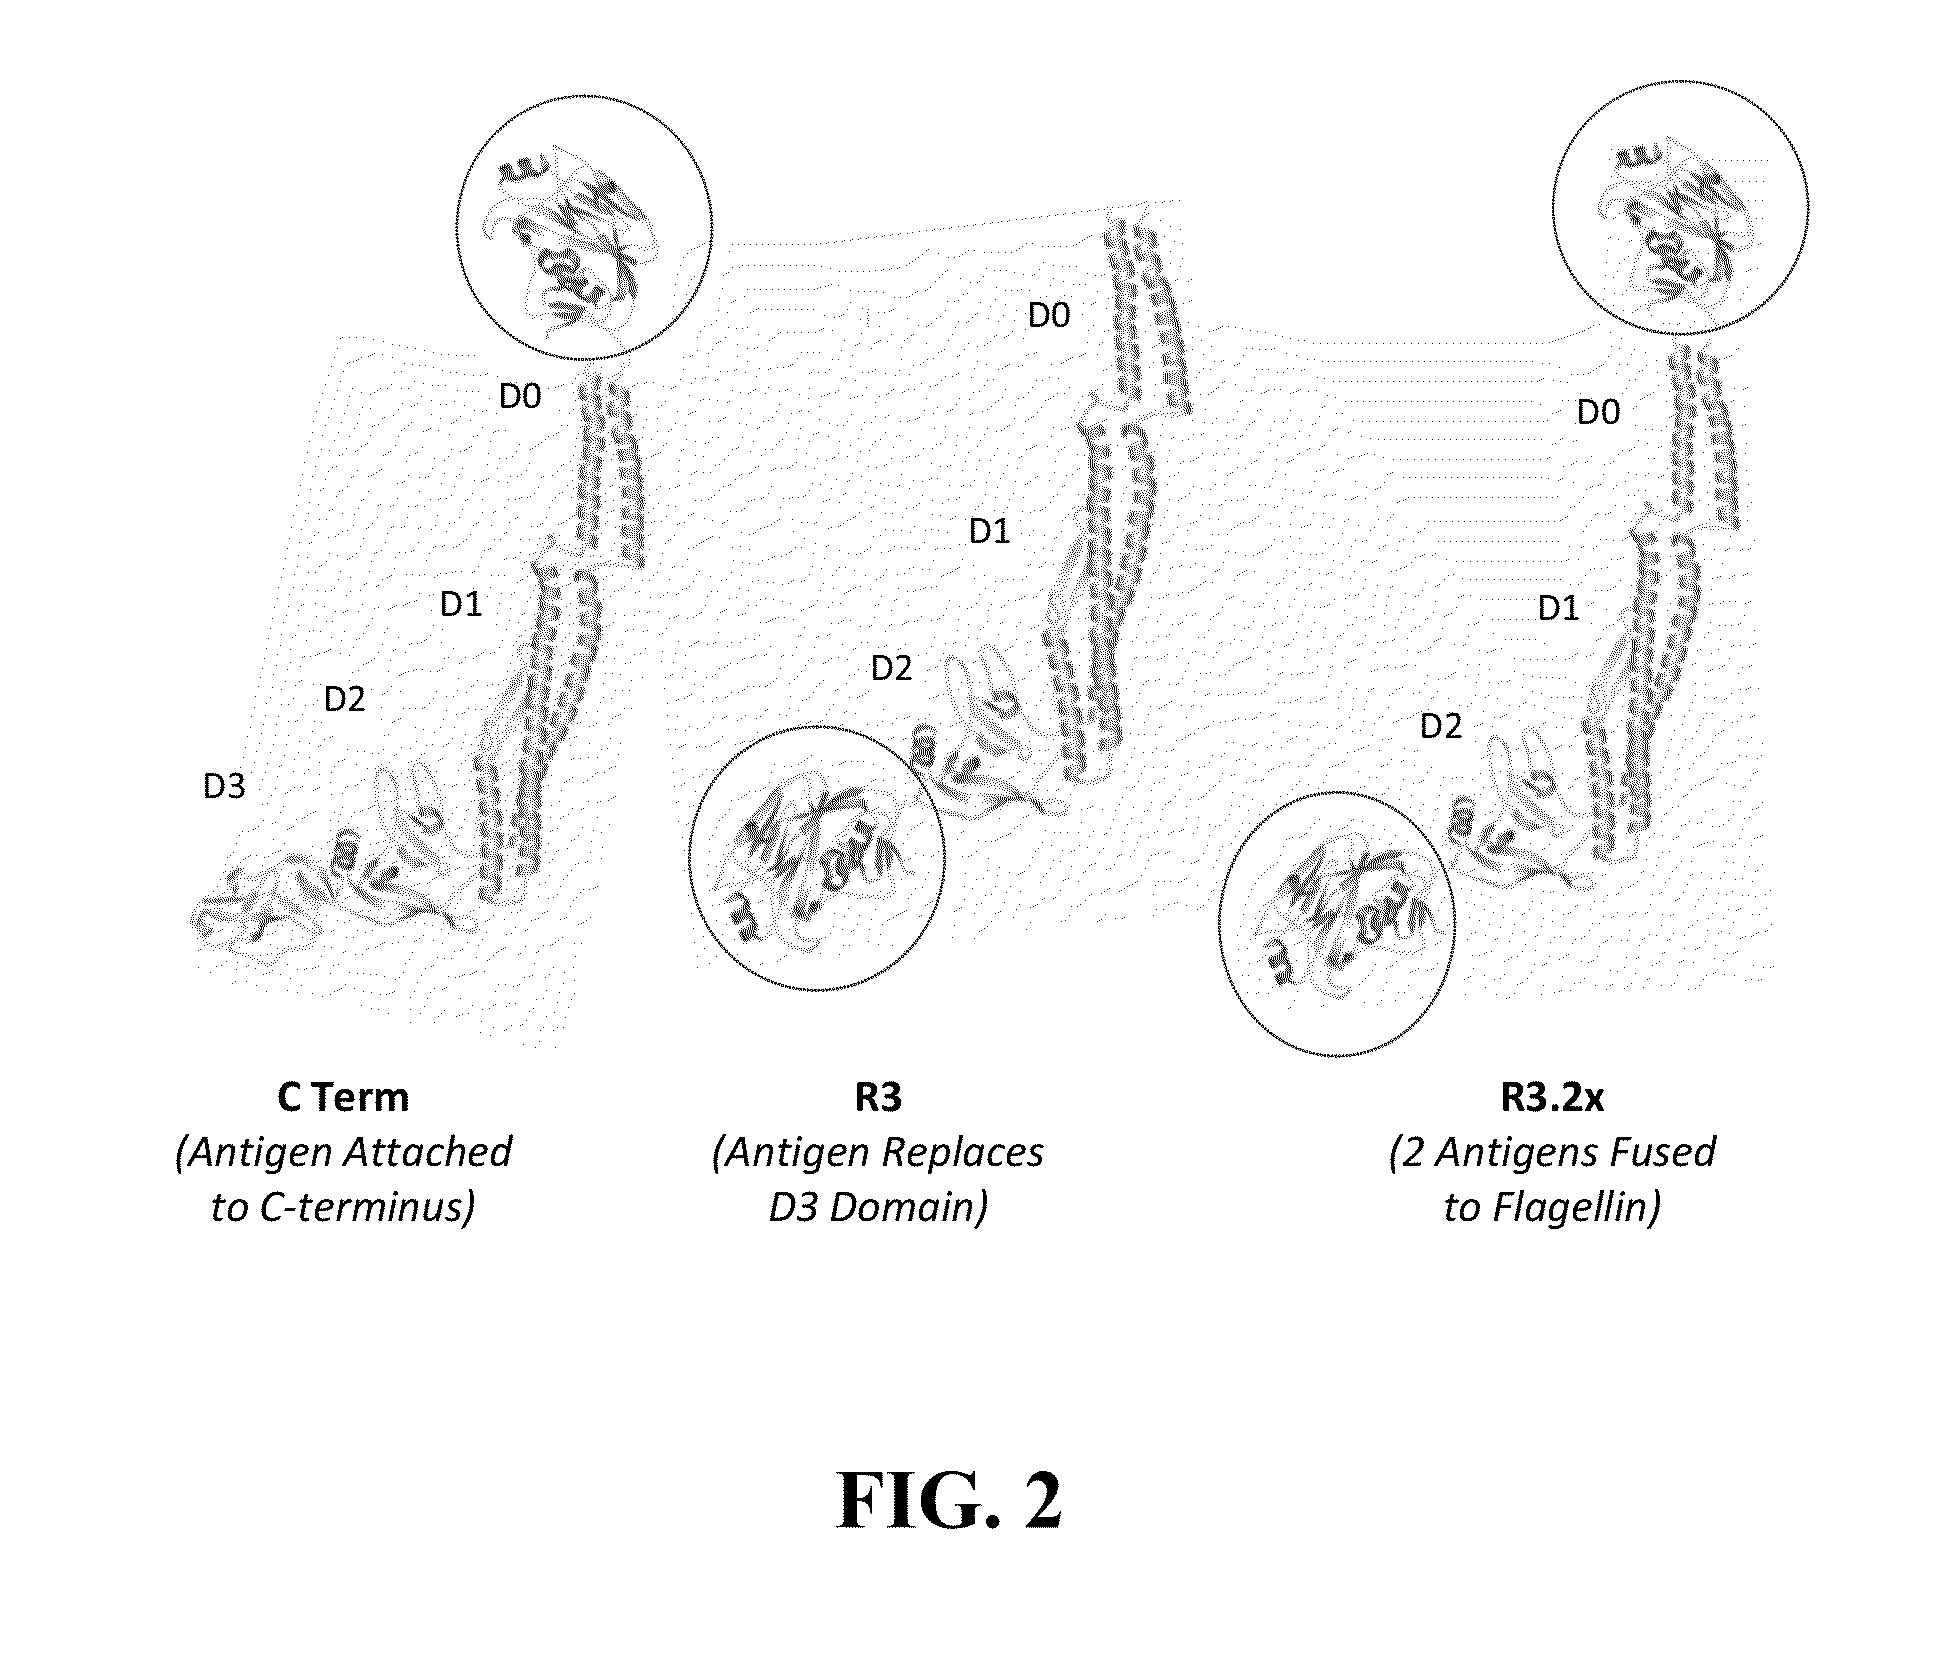 Compositions with enhanced immunogenicity and/or reduced reactogenicity